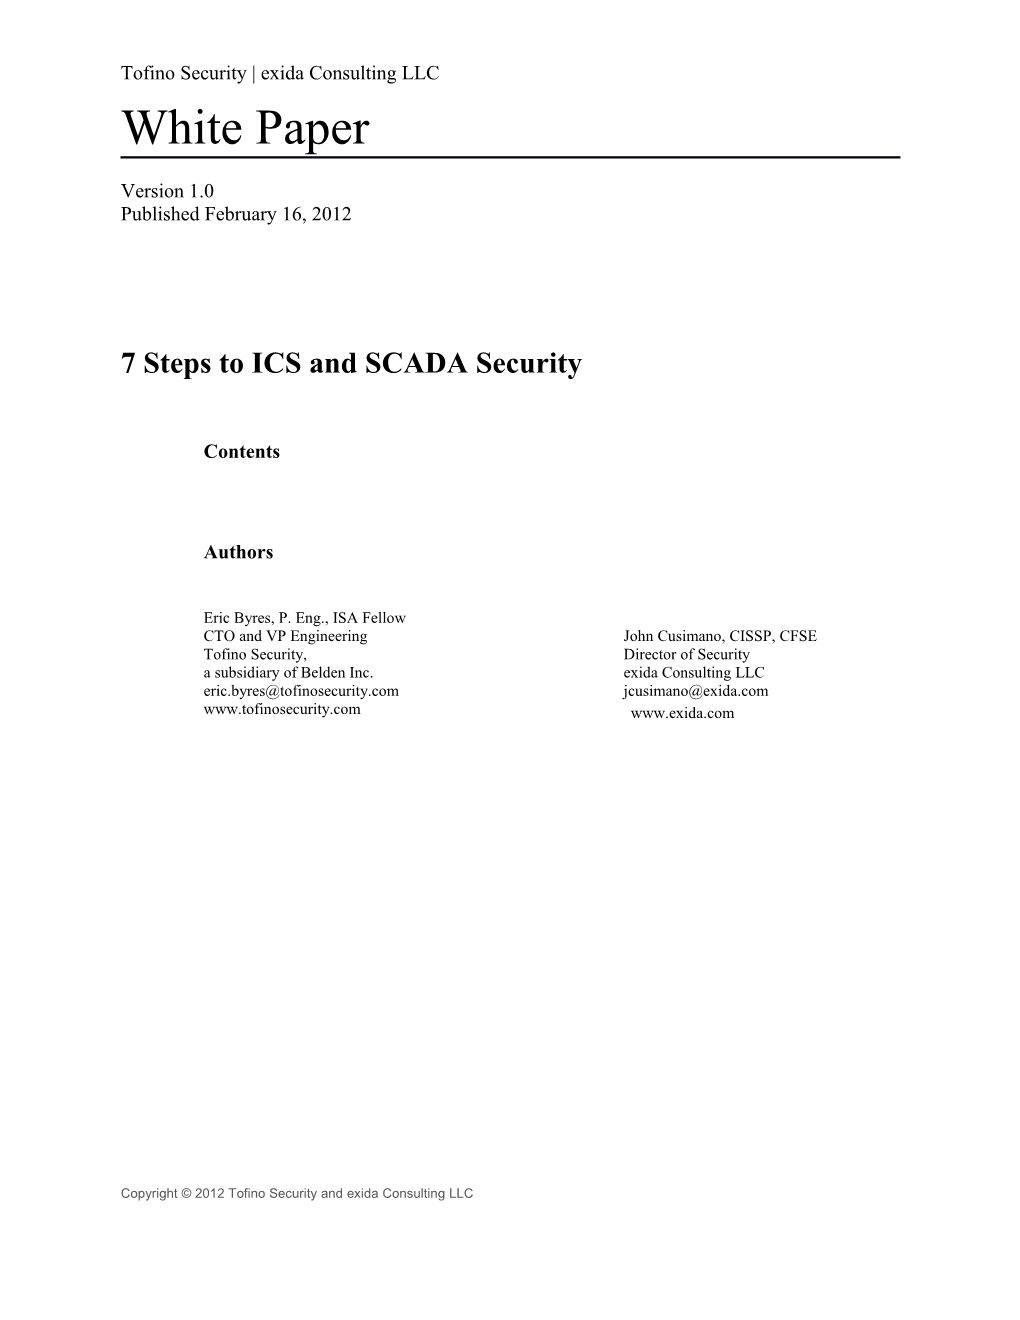 7 Steps to ICS and SCADA Security